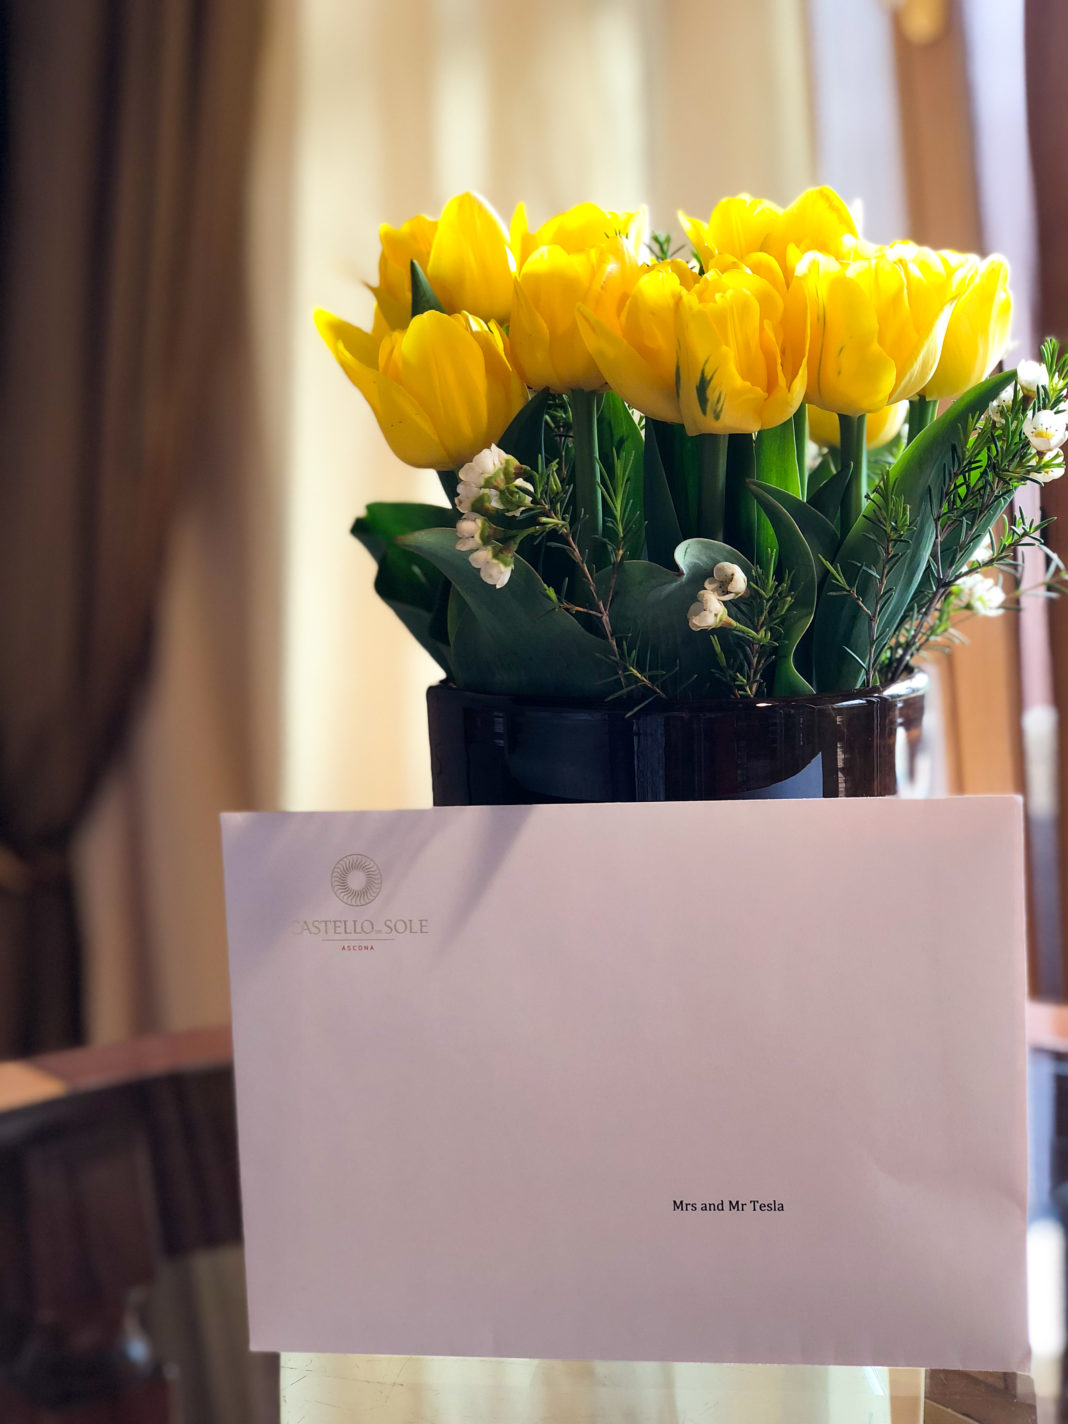 welcome letter and flower bucket